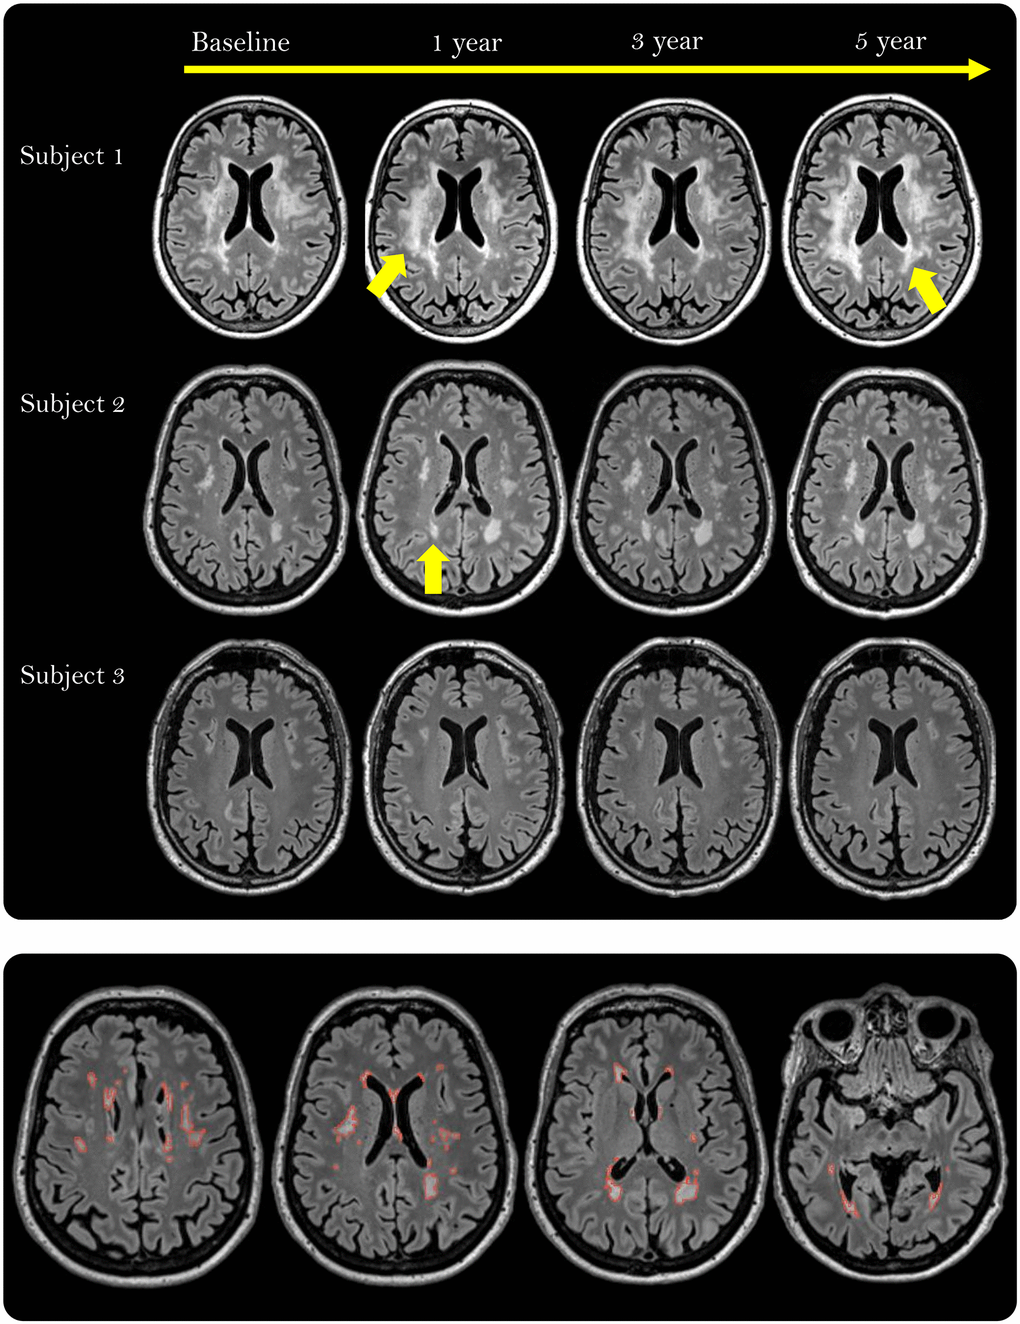 White matter hyperintensities (WMHs) depicted as white, well-defined lesions or confluent areas in white matter on fluid-attenuated inversion recovery (FLAIR) scans in three participants during the 5-year intervention period. The yellow arrows point to areas with growing WMH lesions (Subject 1) or a new lesion (Subject 2). The lower row shows the manually delineated WMHs (red outline) across 4 out of 176 slices in one participant.